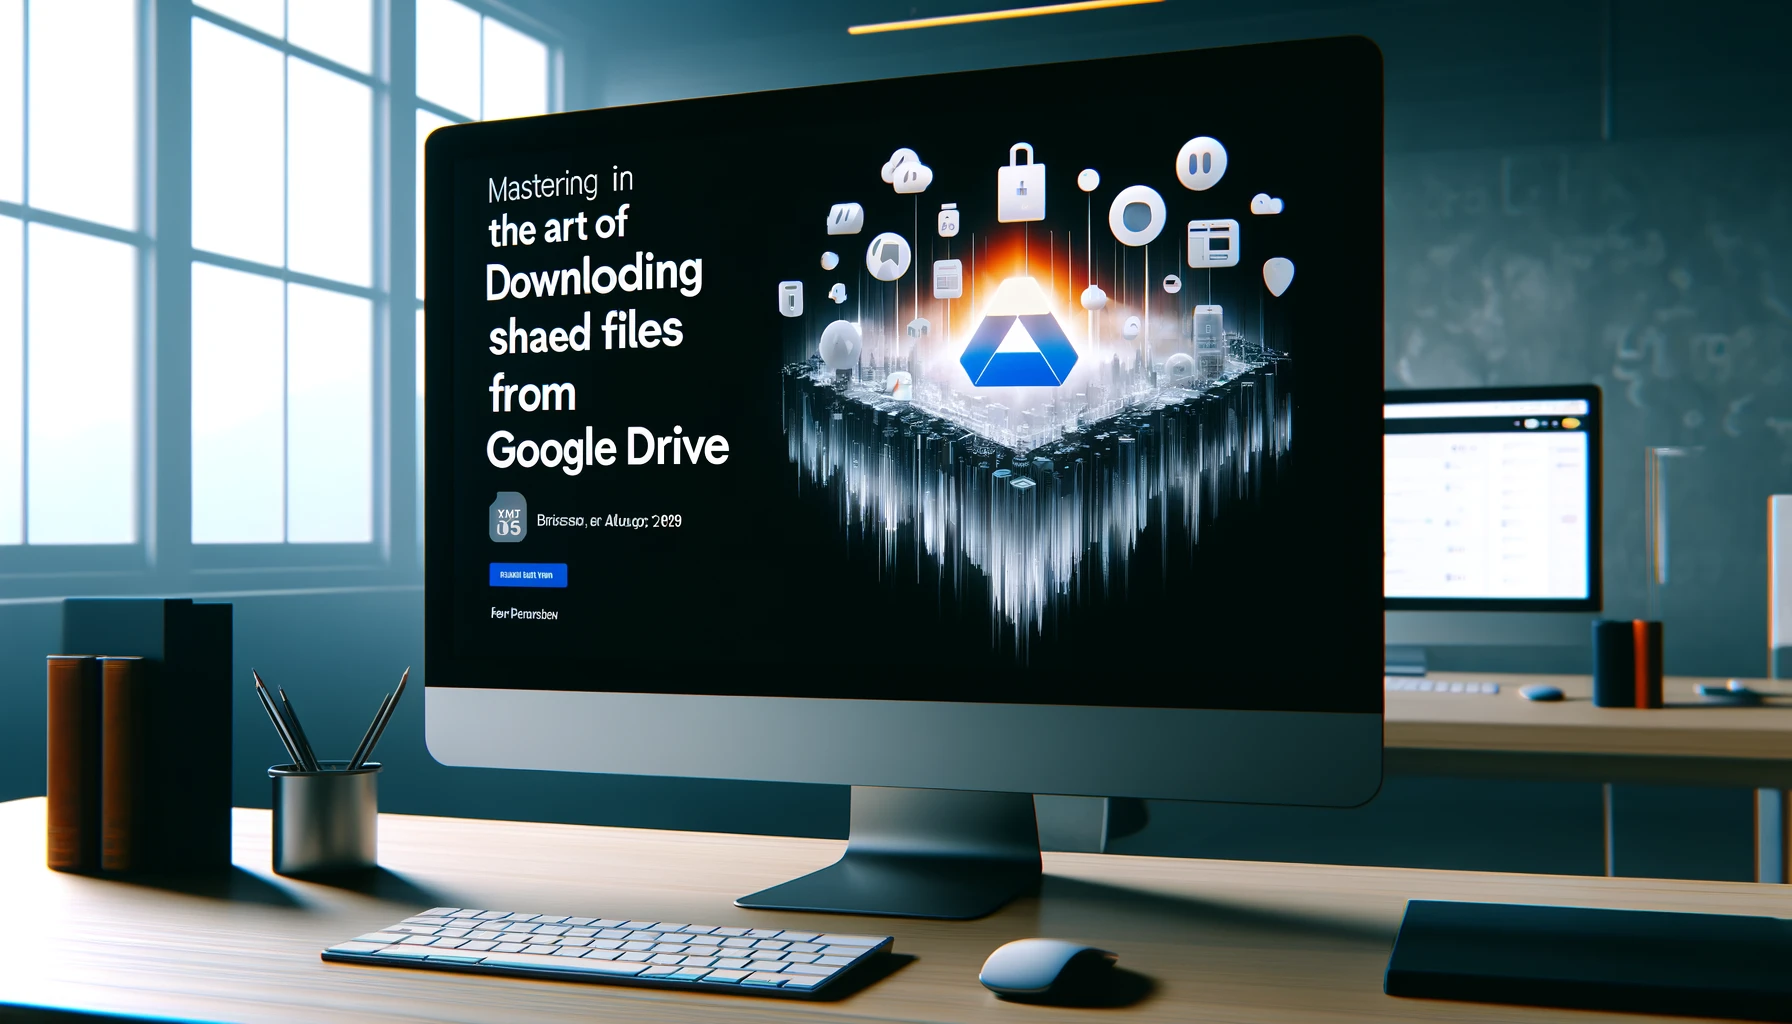 Mastering the Art of Downloading Shared Files from Google Drive